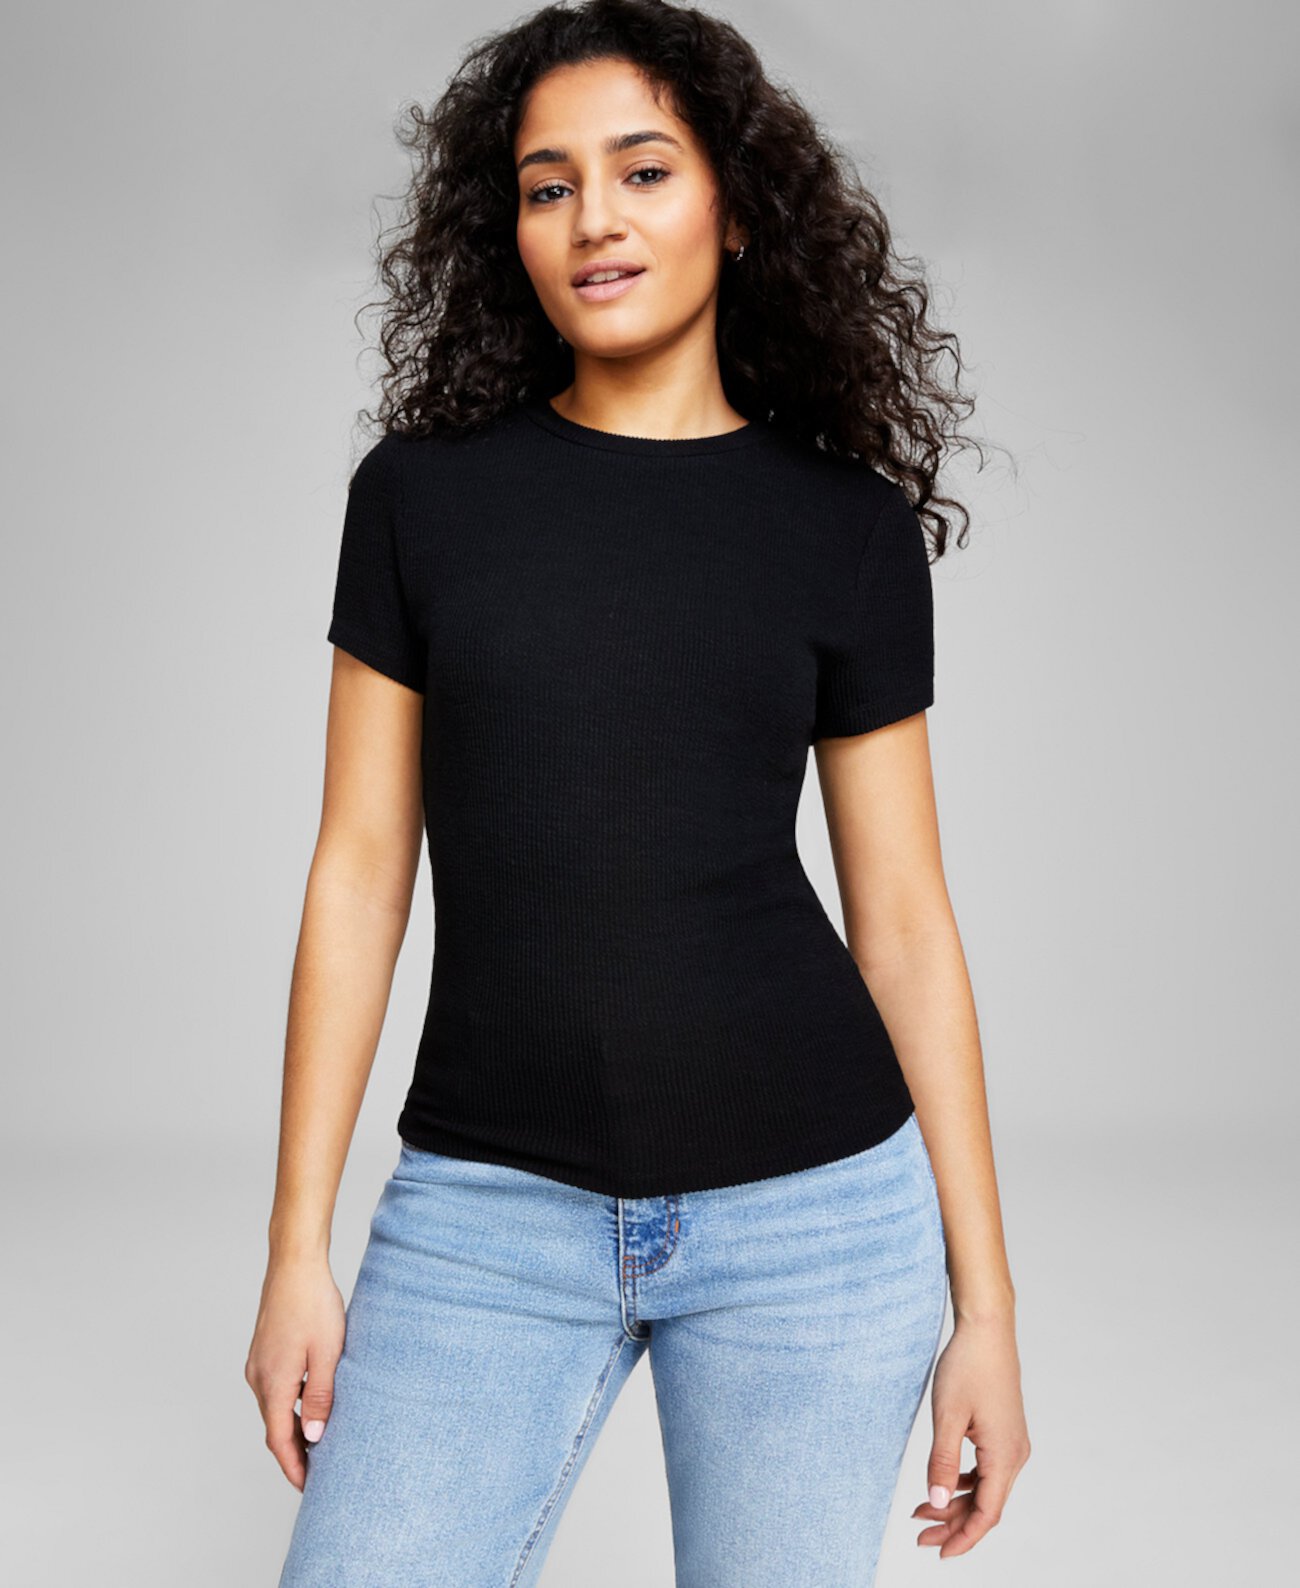 Women's Ribbed Crewneck Short-Sleeve T-Shirt, Created for Macy's And Now This